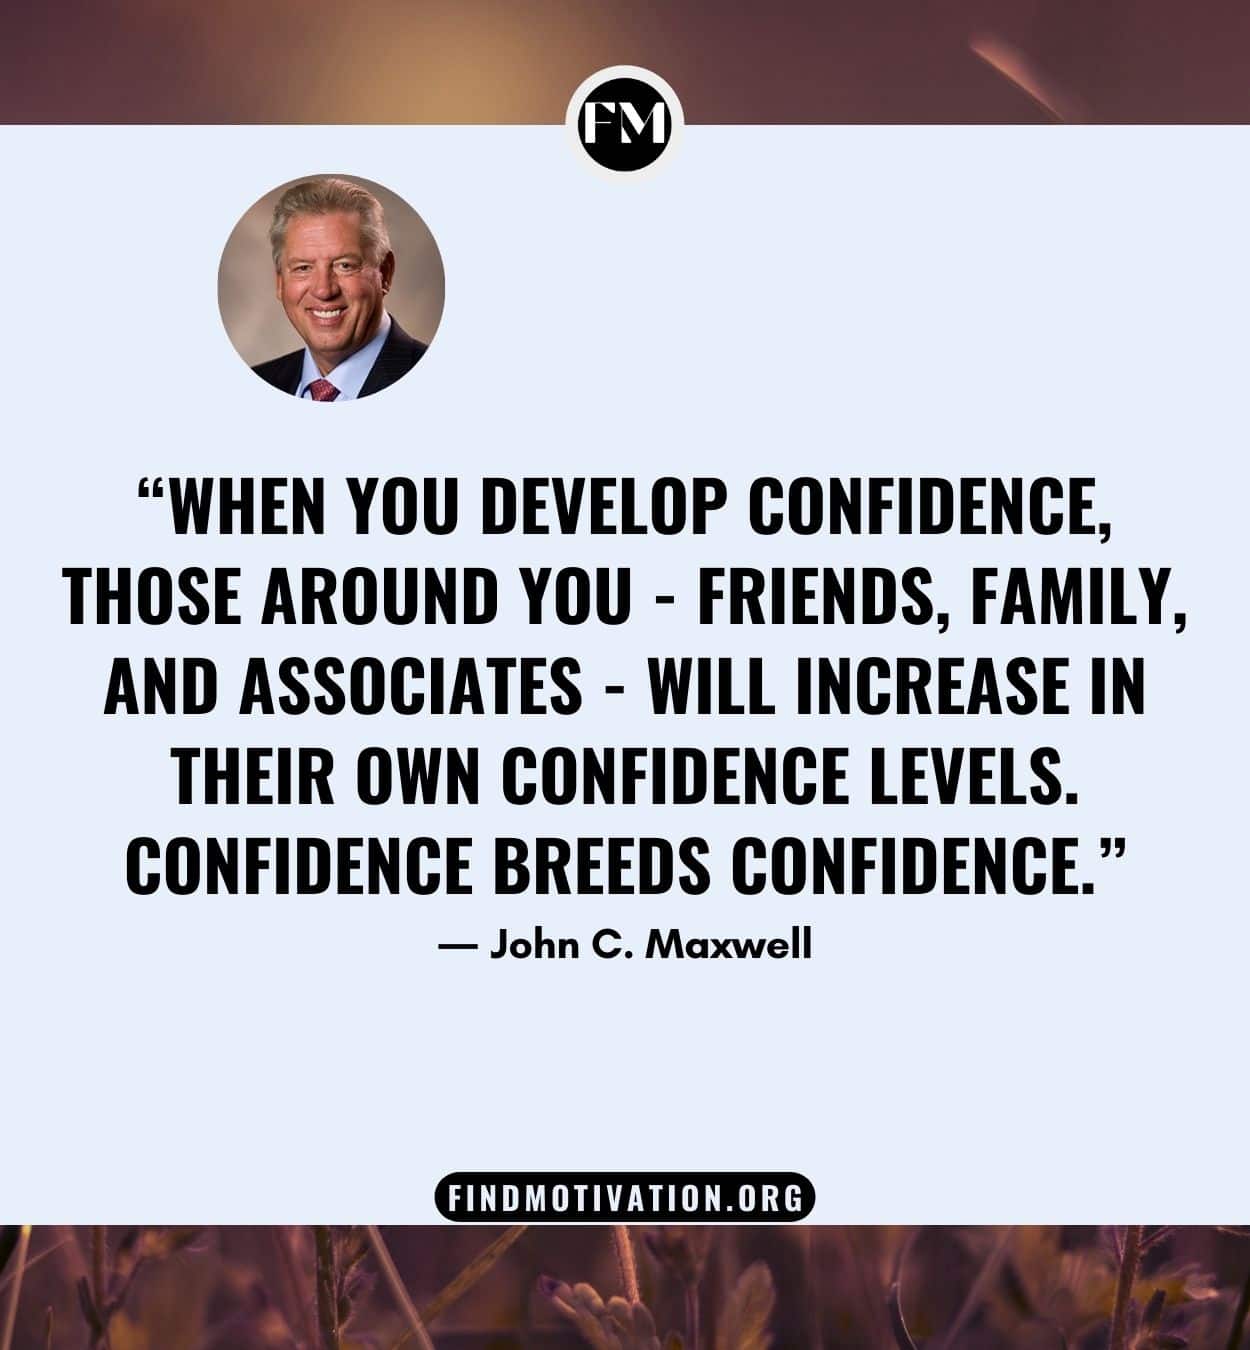 John C Maxwell's life lesson quotes to manage your life for living a better life